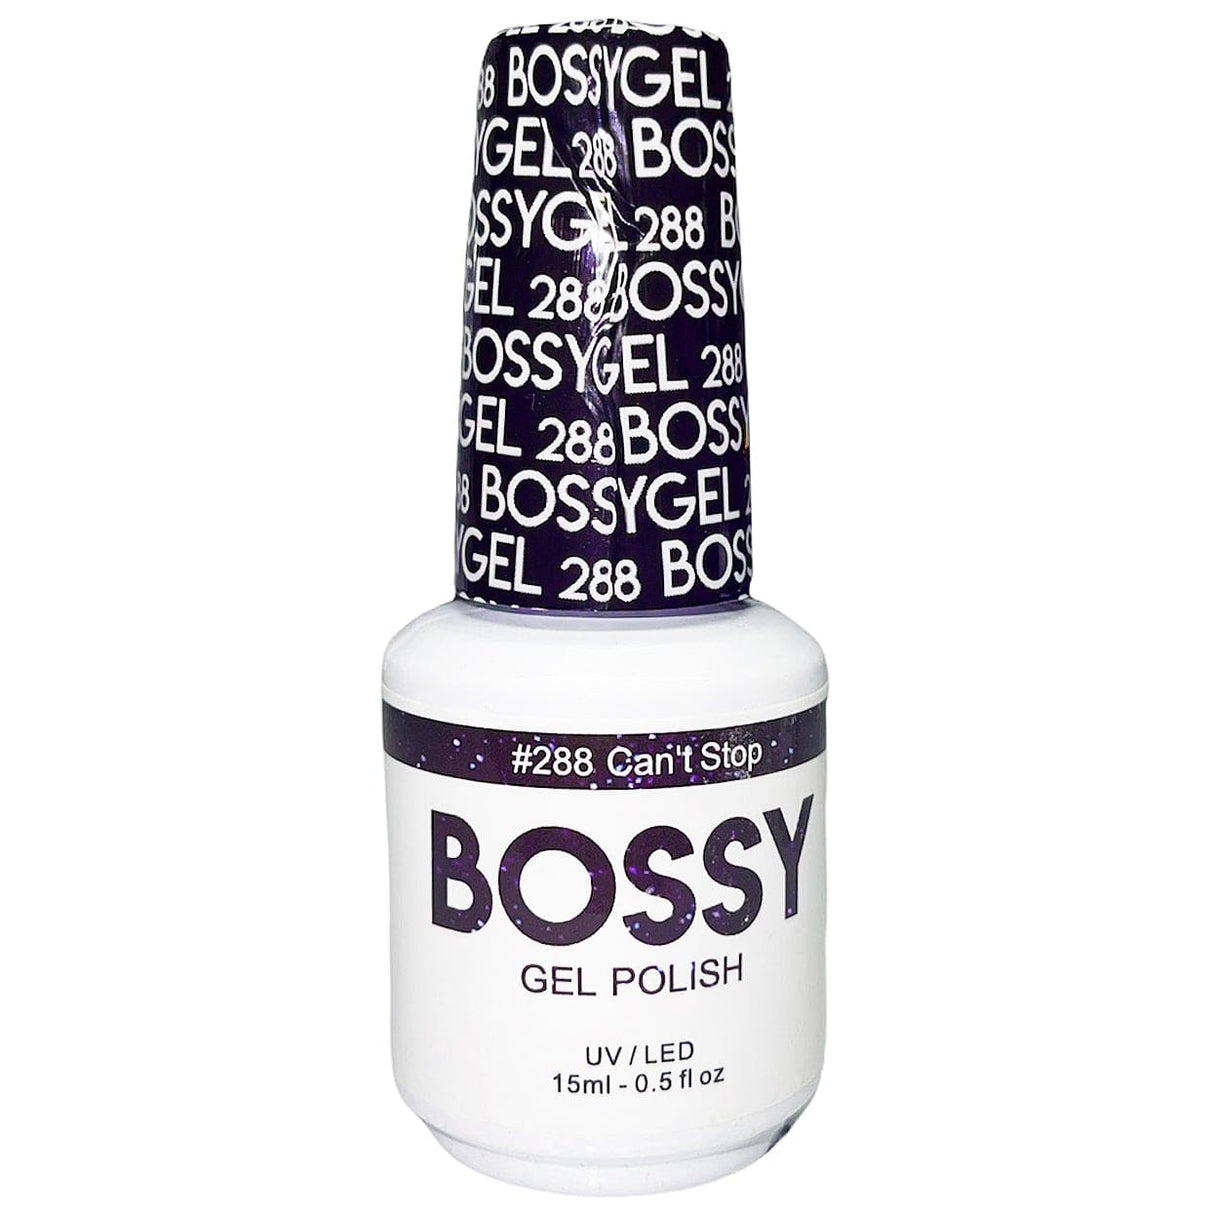 Bossy Gel Polish BS 288 Can't Stop